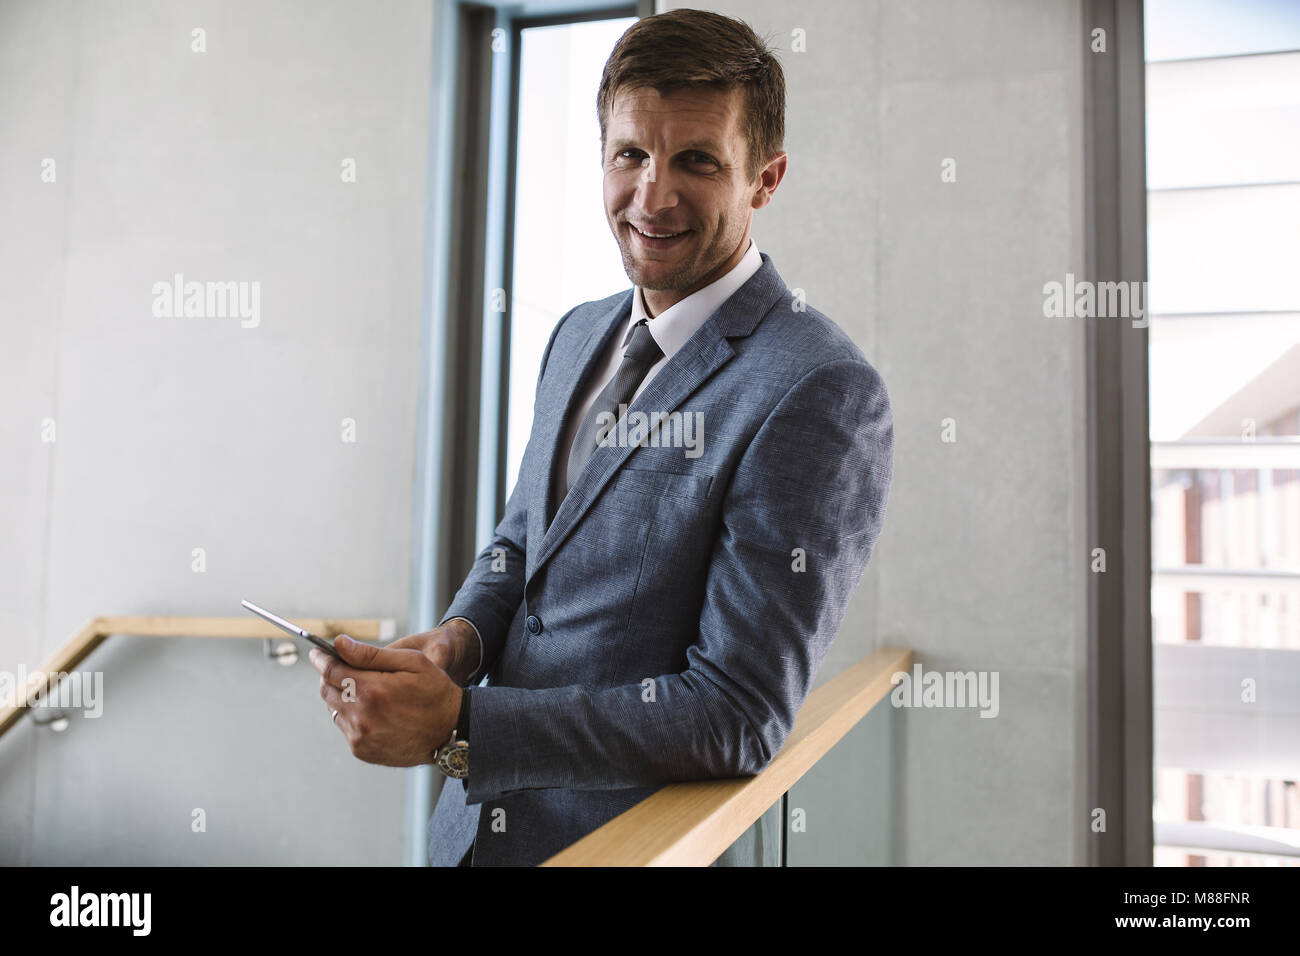 Portrait of happy businessman standing in the office corridor with a digital tablet. Male entrepreneur looking at camera and smiling. Stock Photo